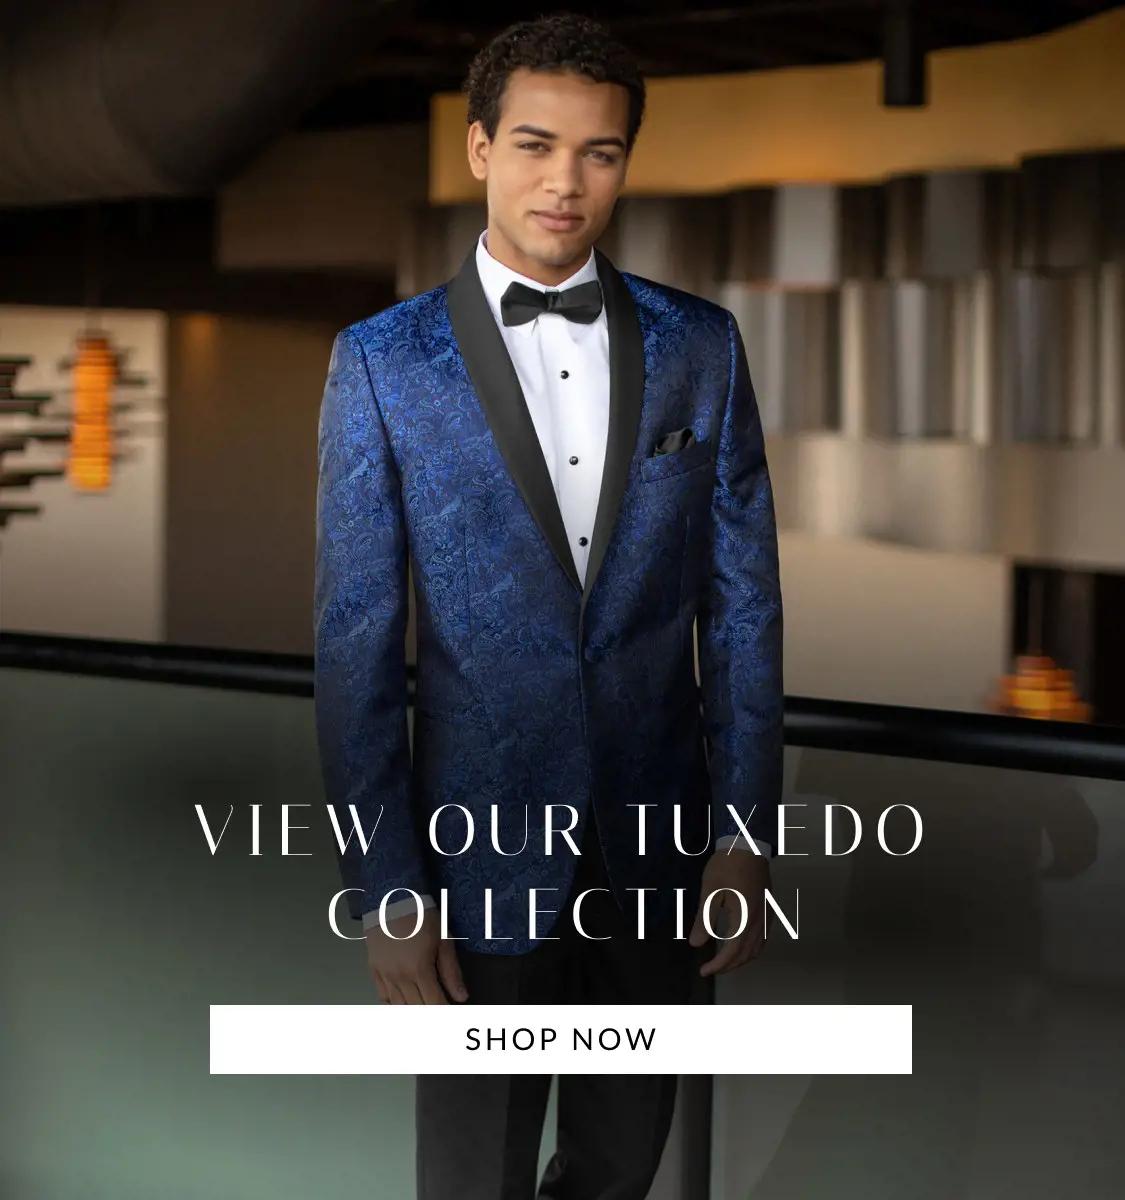 Banner Promoting Tuxedos